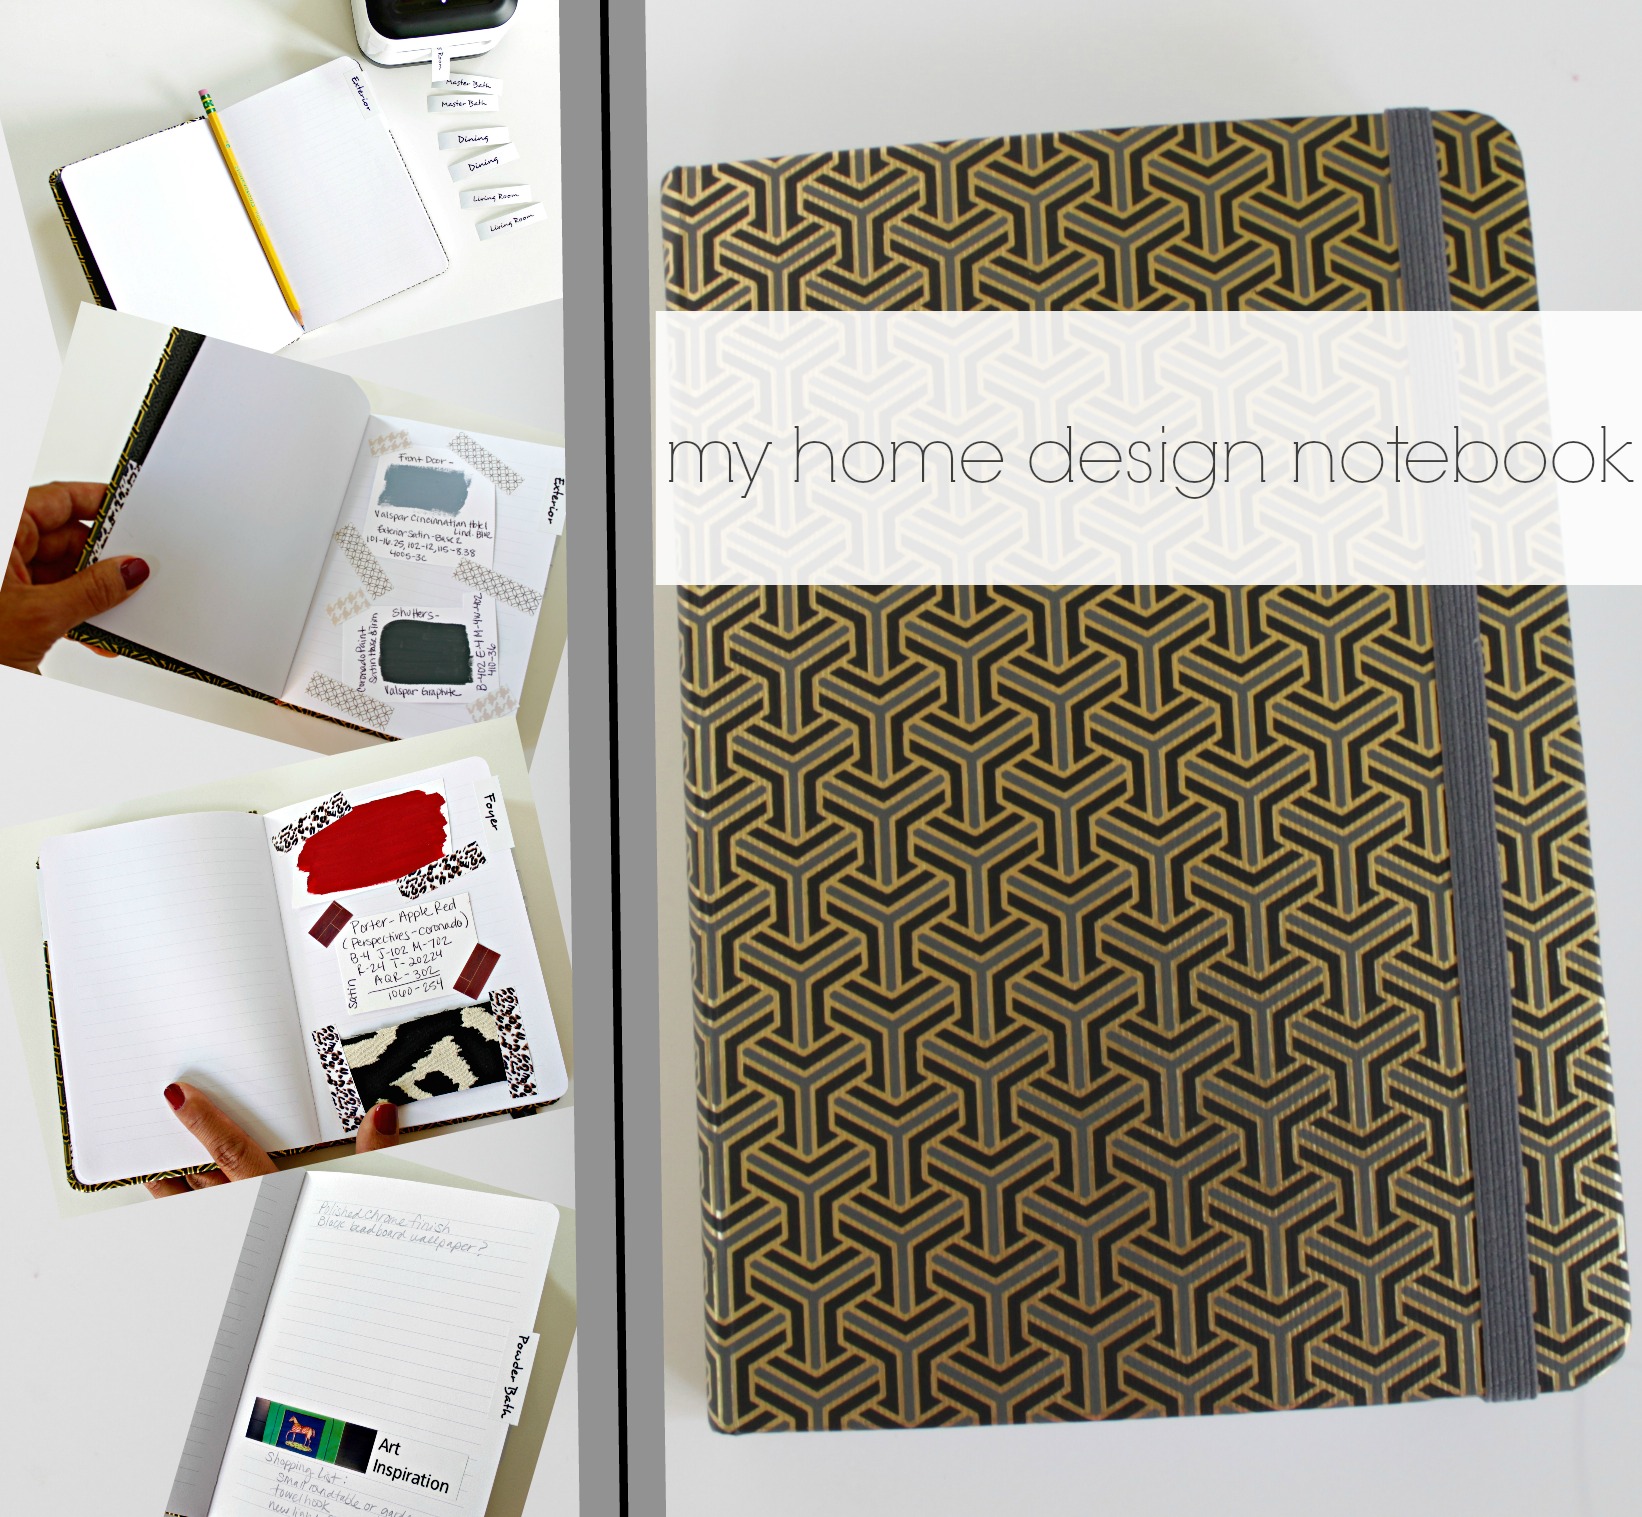 How To Make A My Home Design Book The Chic Site throughout Home Design Notebook